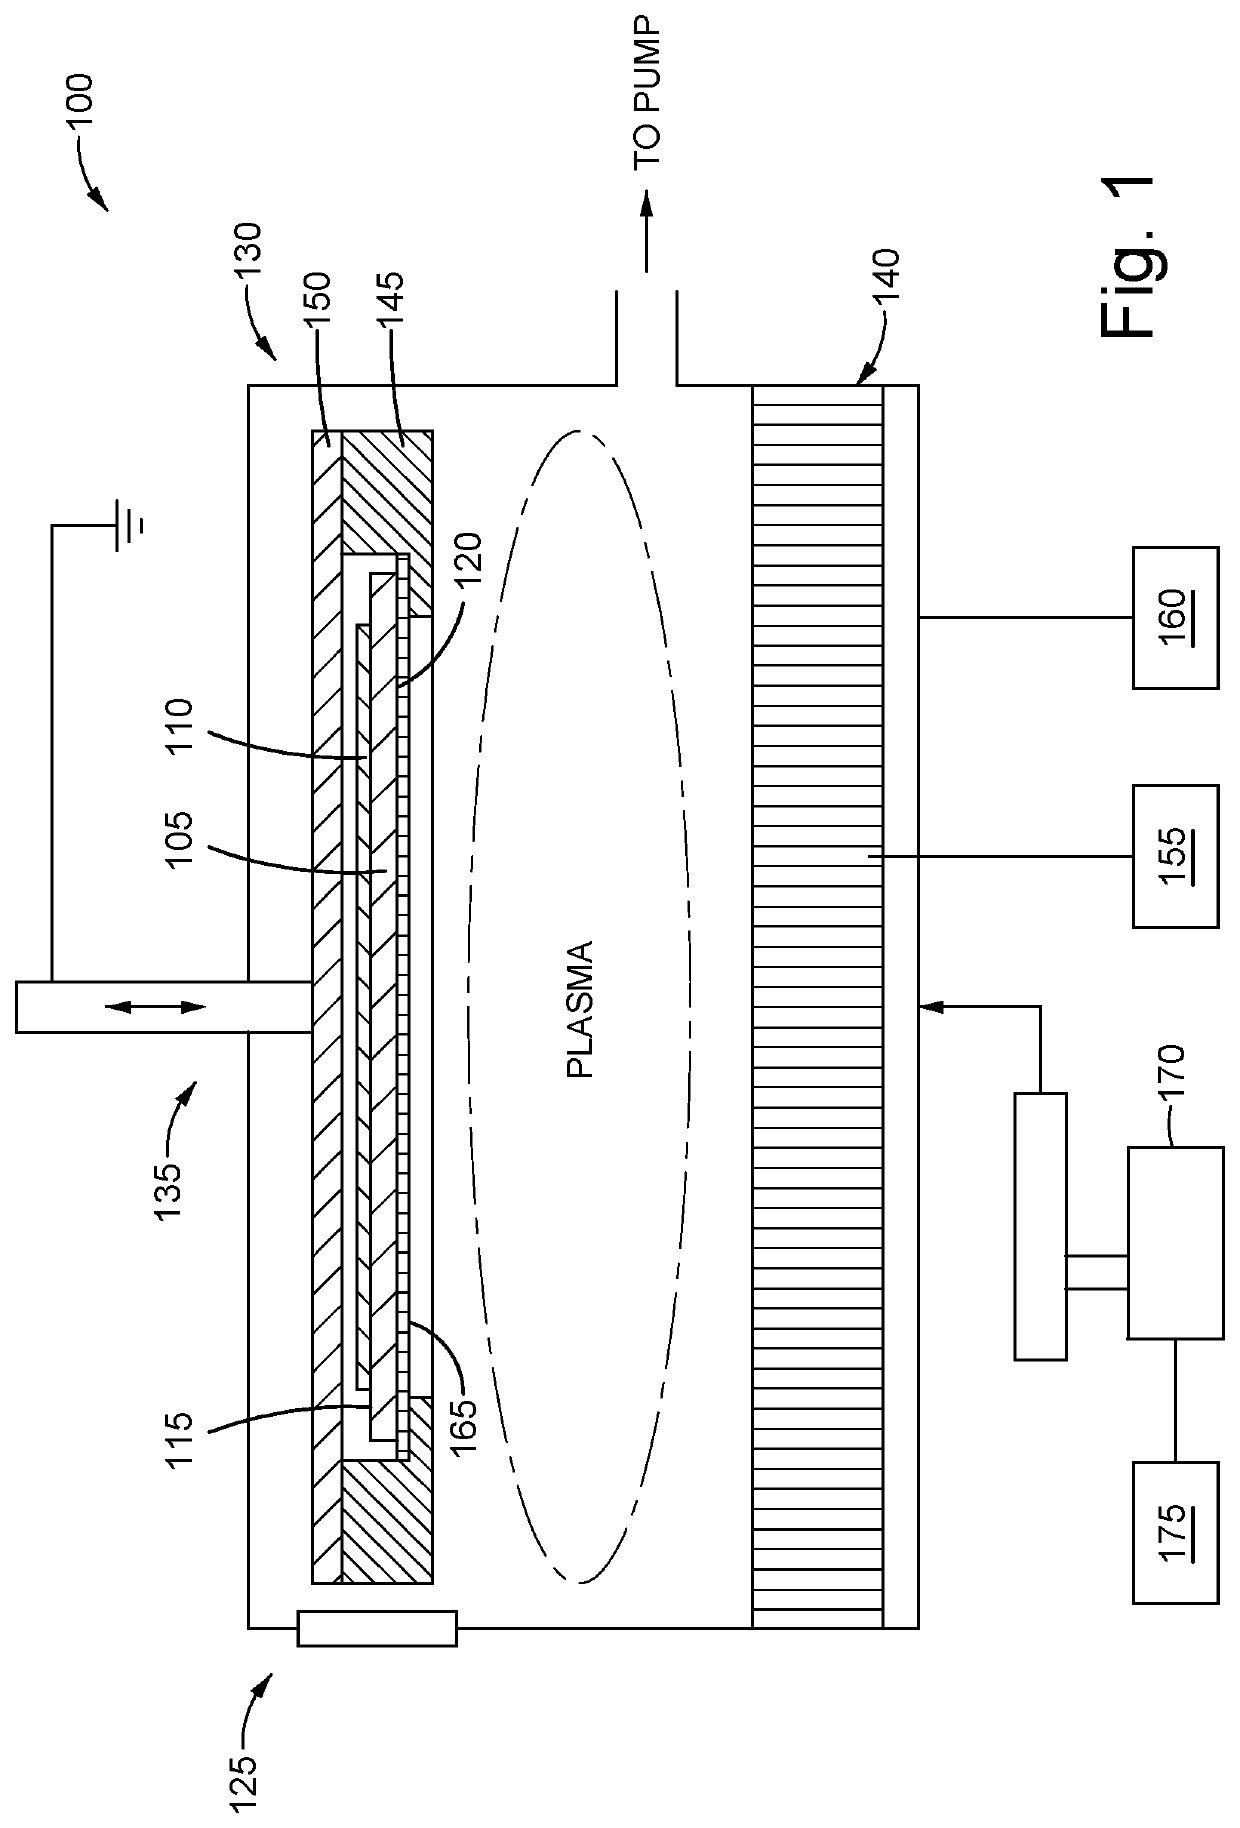 Methods and apparatus to eliminate wafer bow for CVD and patterning HVM systems